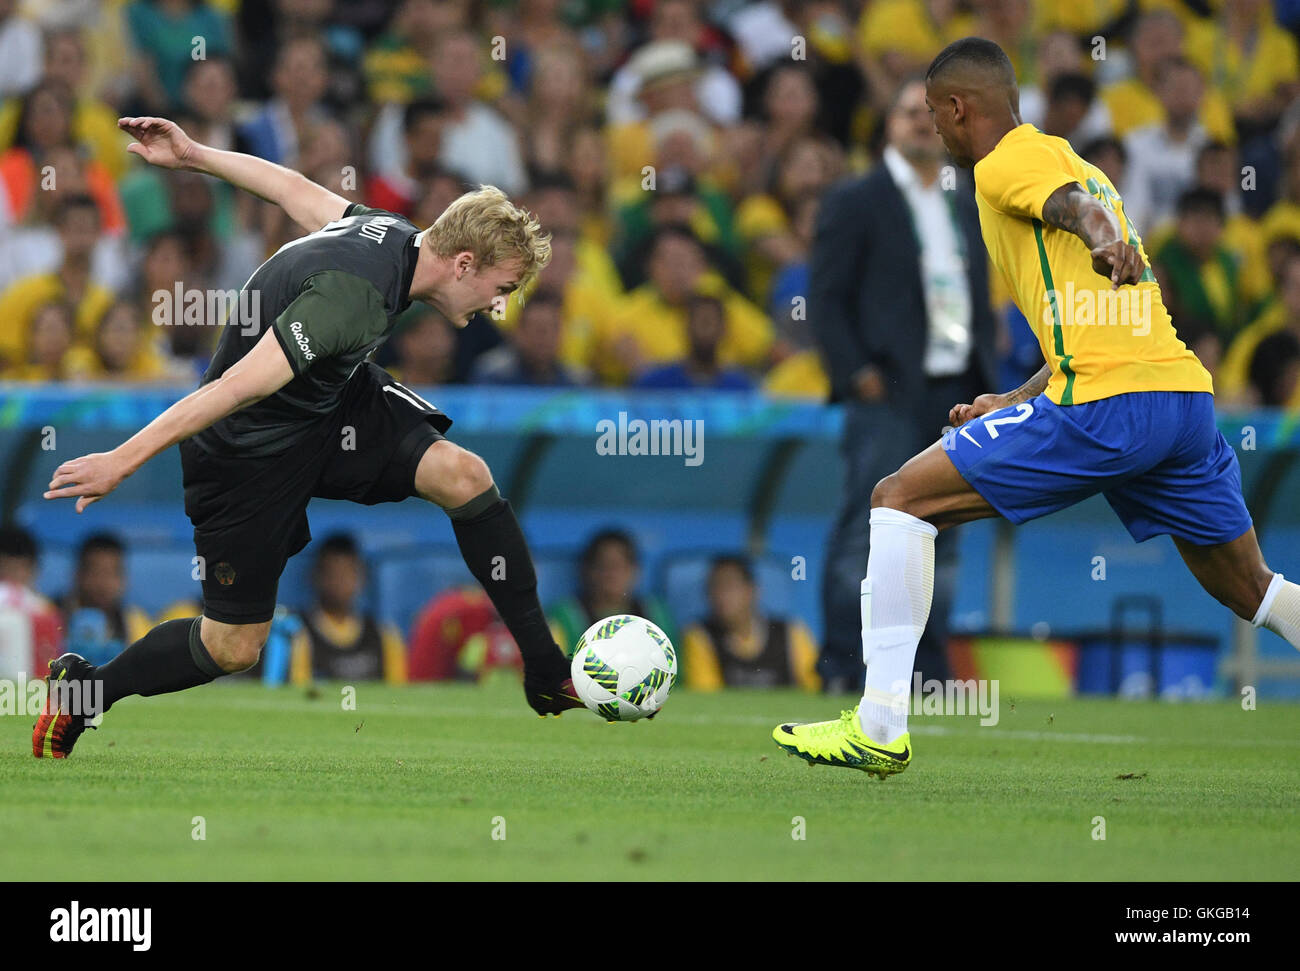 Rio de Janeiro, Brazil. 20th Aug, 2016. Julian Brandt (L) of Germany and Walace of Brazil vie for the ball during the Men's soccer Gold Medal Match between Brazil and Germany during the Rio 2016 Olympic Games at the Maracana in Rio de Janeiro, Brazil, 20 August 2016. Photo: Soeren Stache/dpa (re-crop)/dpa/Alamy Live News Stock Photo